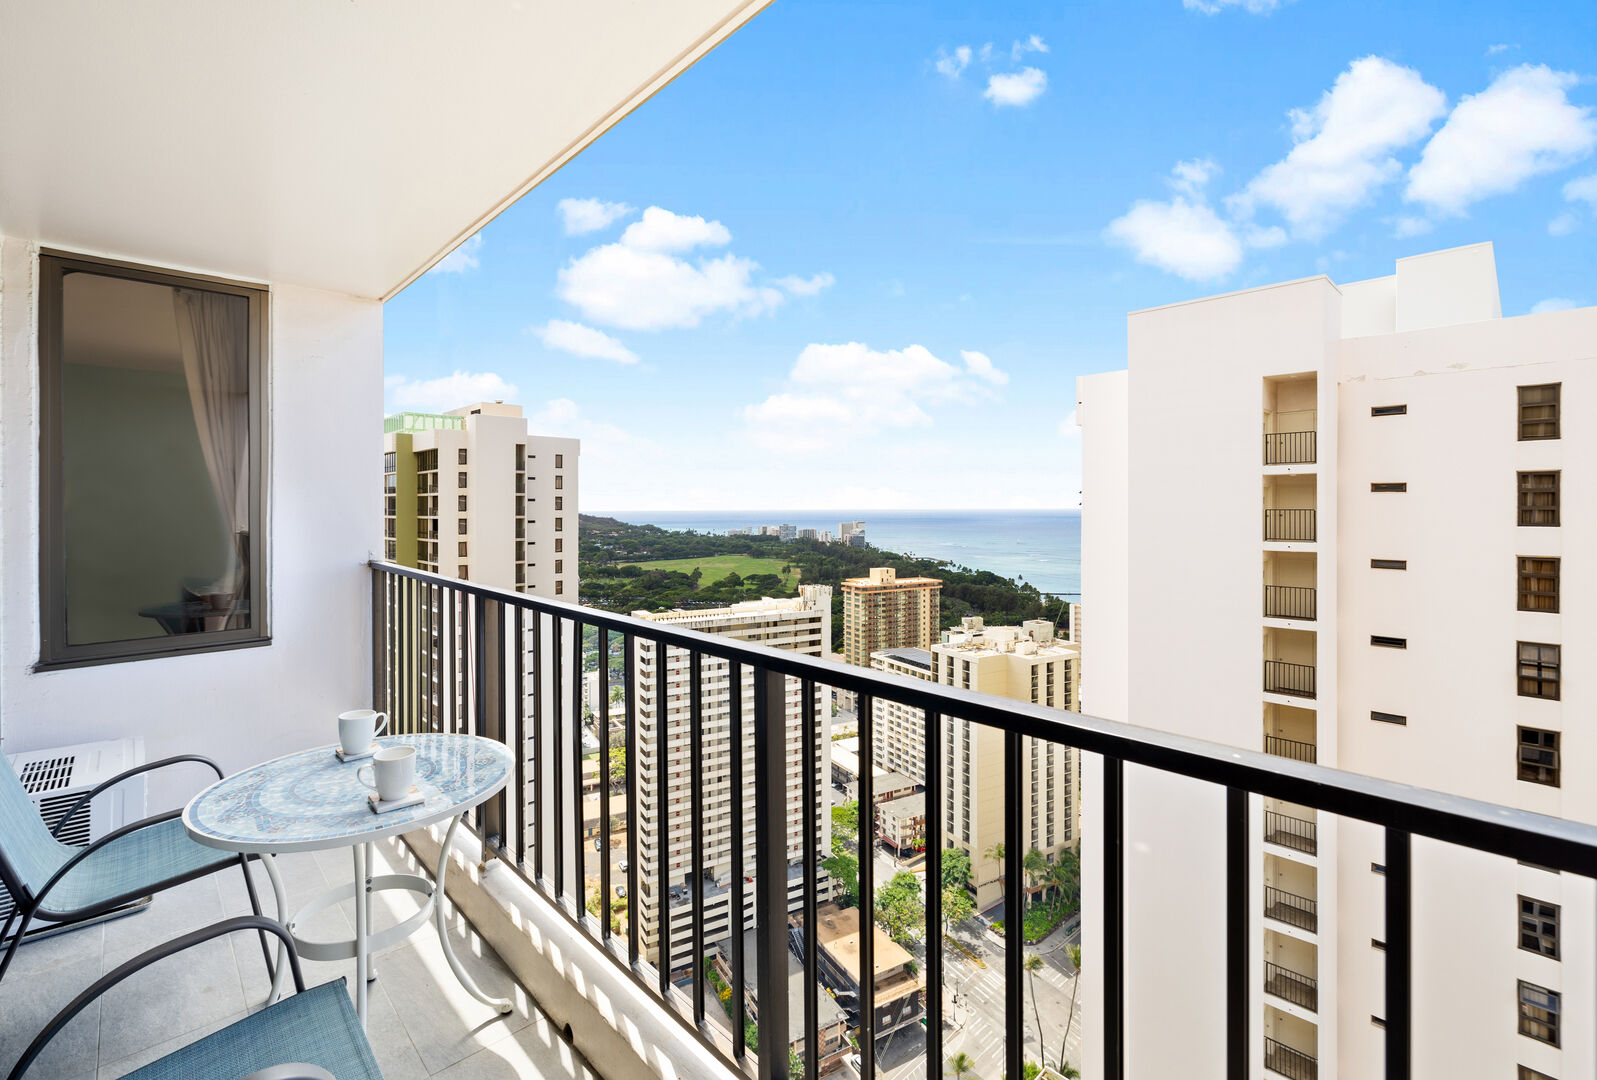 Enjoy the refreshing views of the ocean and city from your balcony!